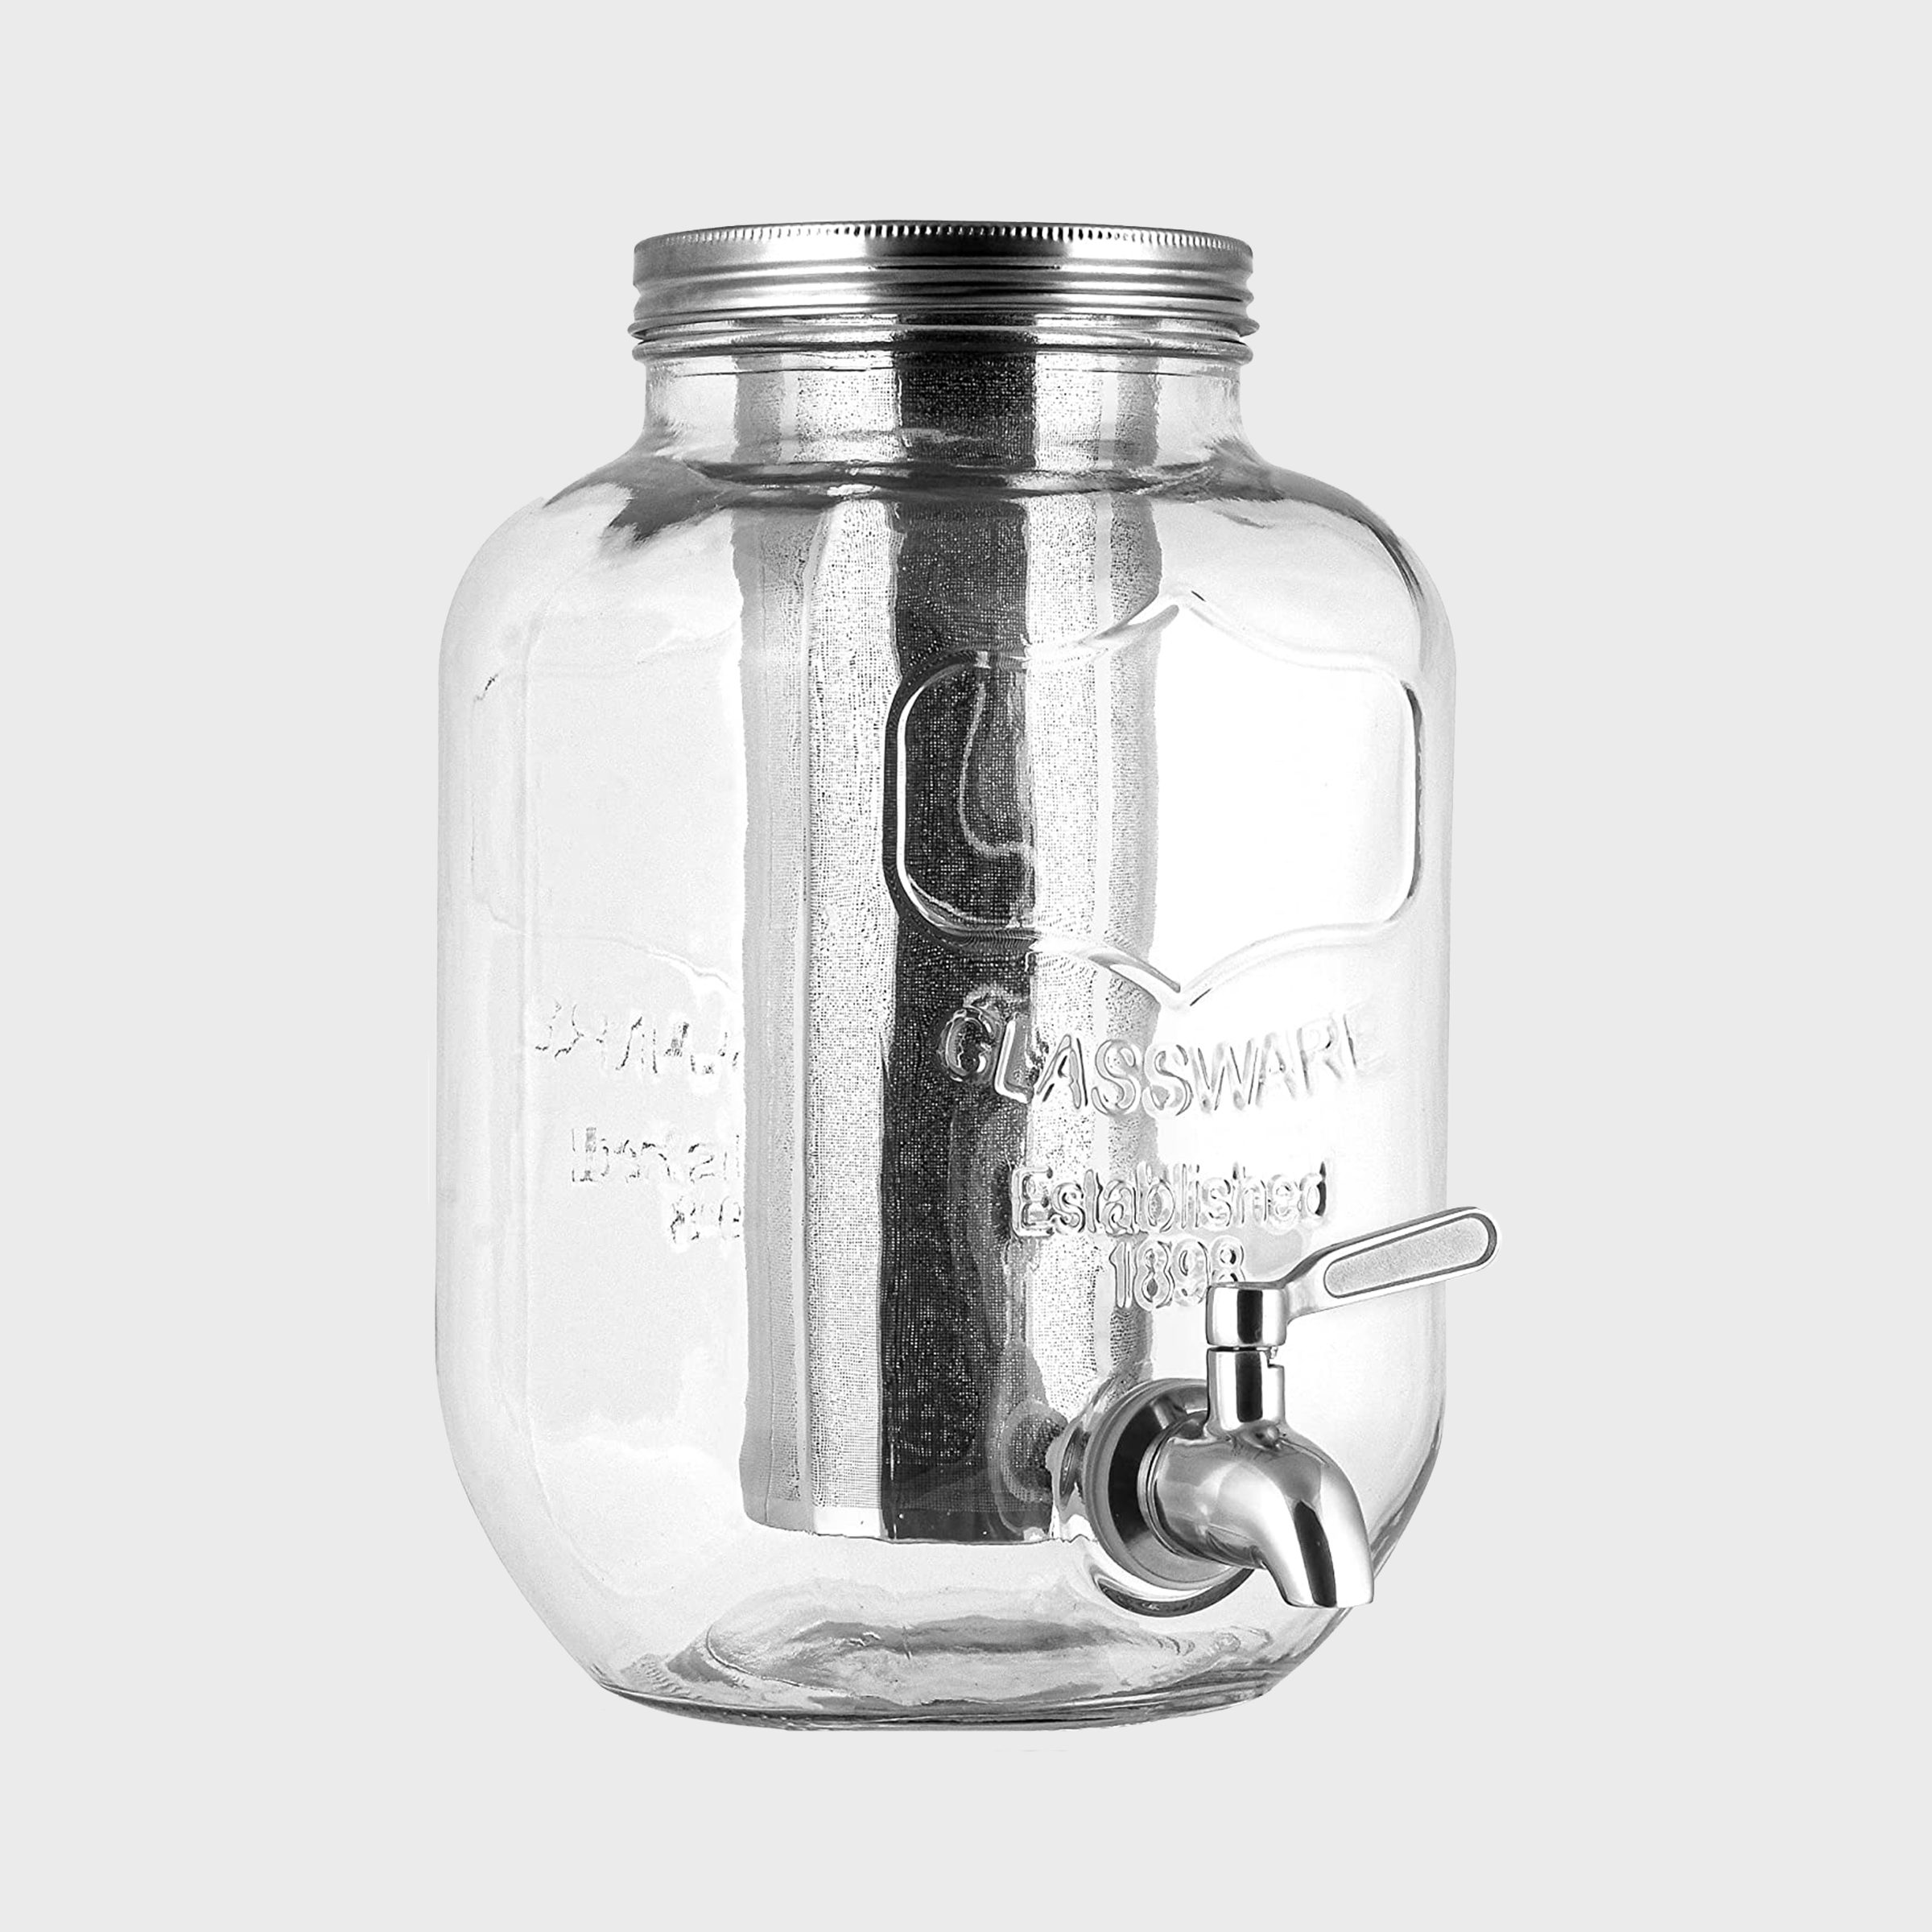 Cold Brew Coffee Maker (1 Gallon) – The Curiosity Cafe